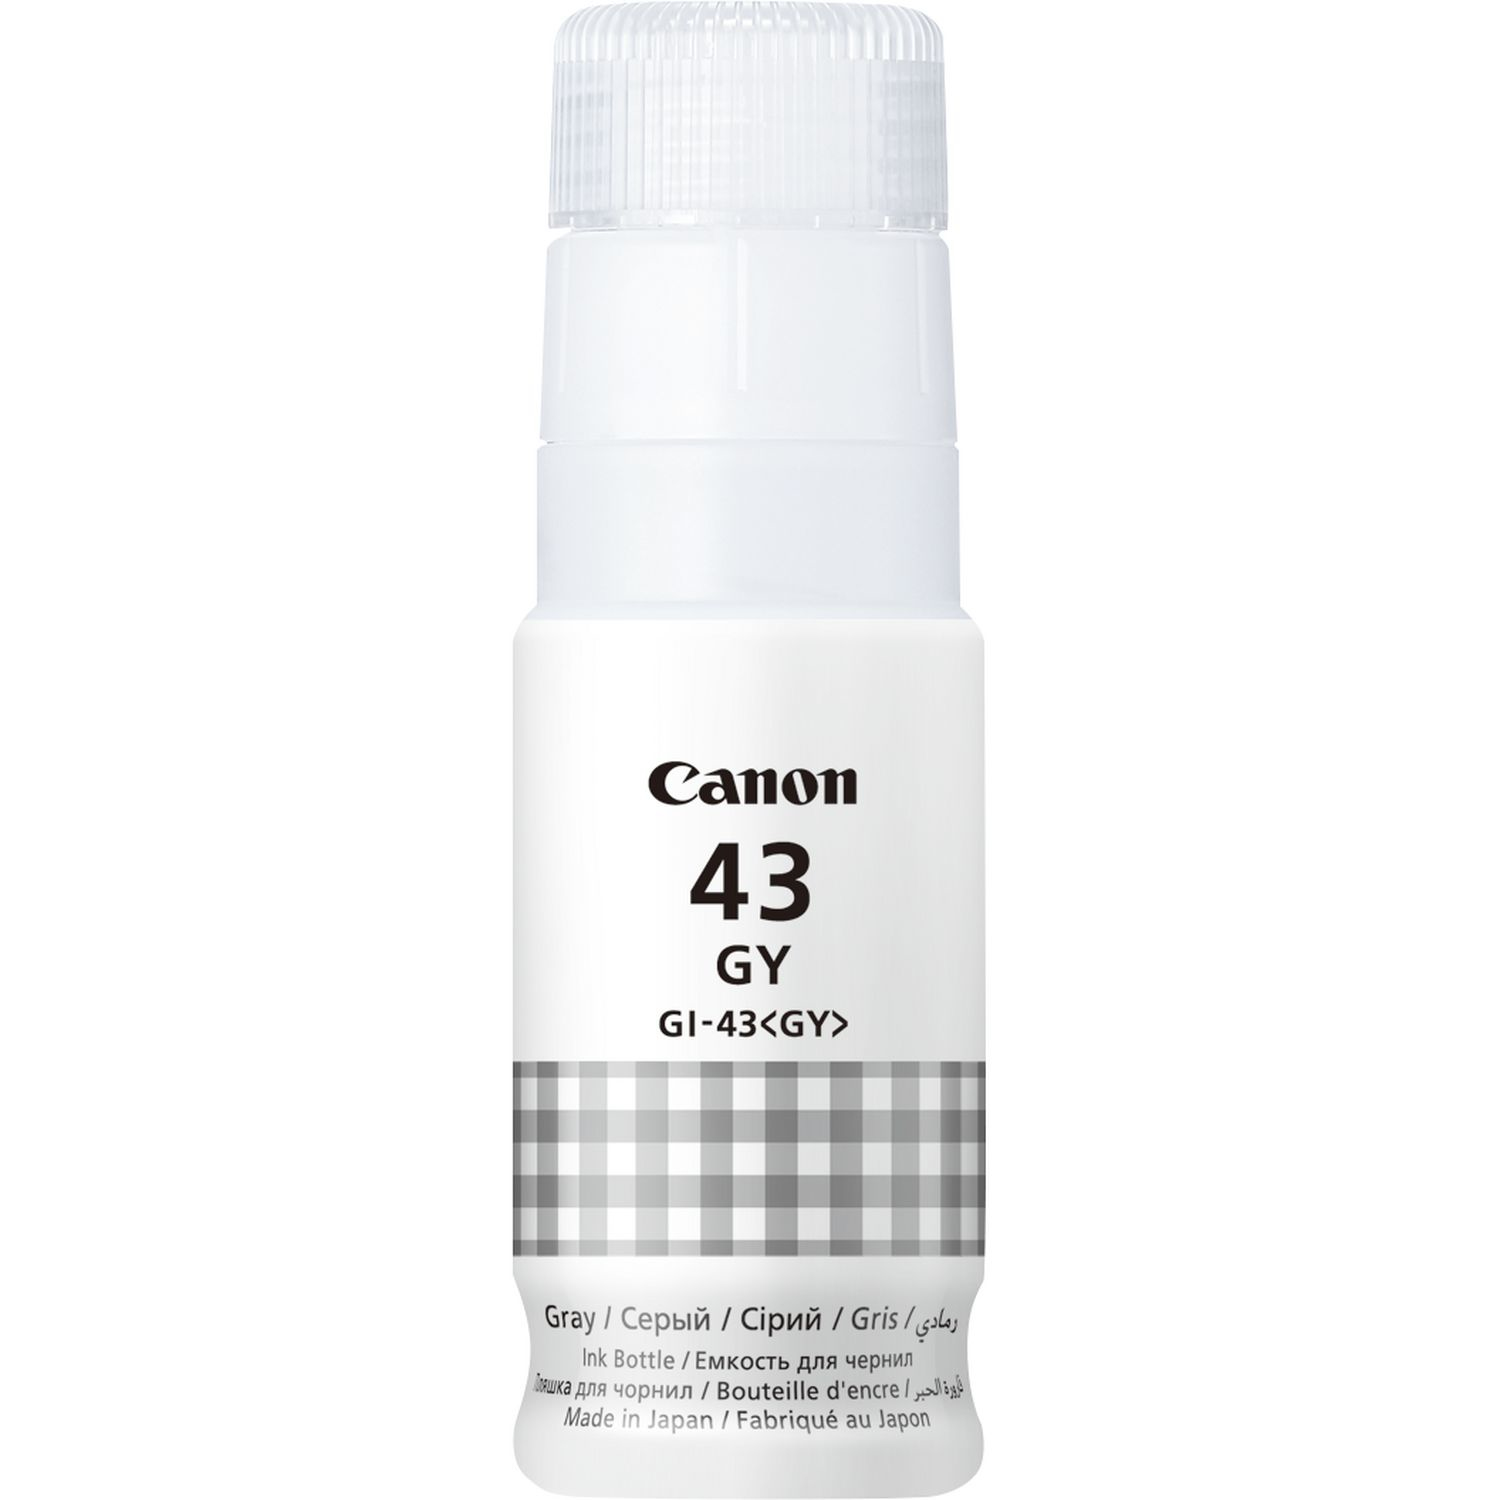 Photos - Inks & Toners Canon 4707C001/GI-43GY Ink bottle gray 3800 Photos 60ml for  Pixm 